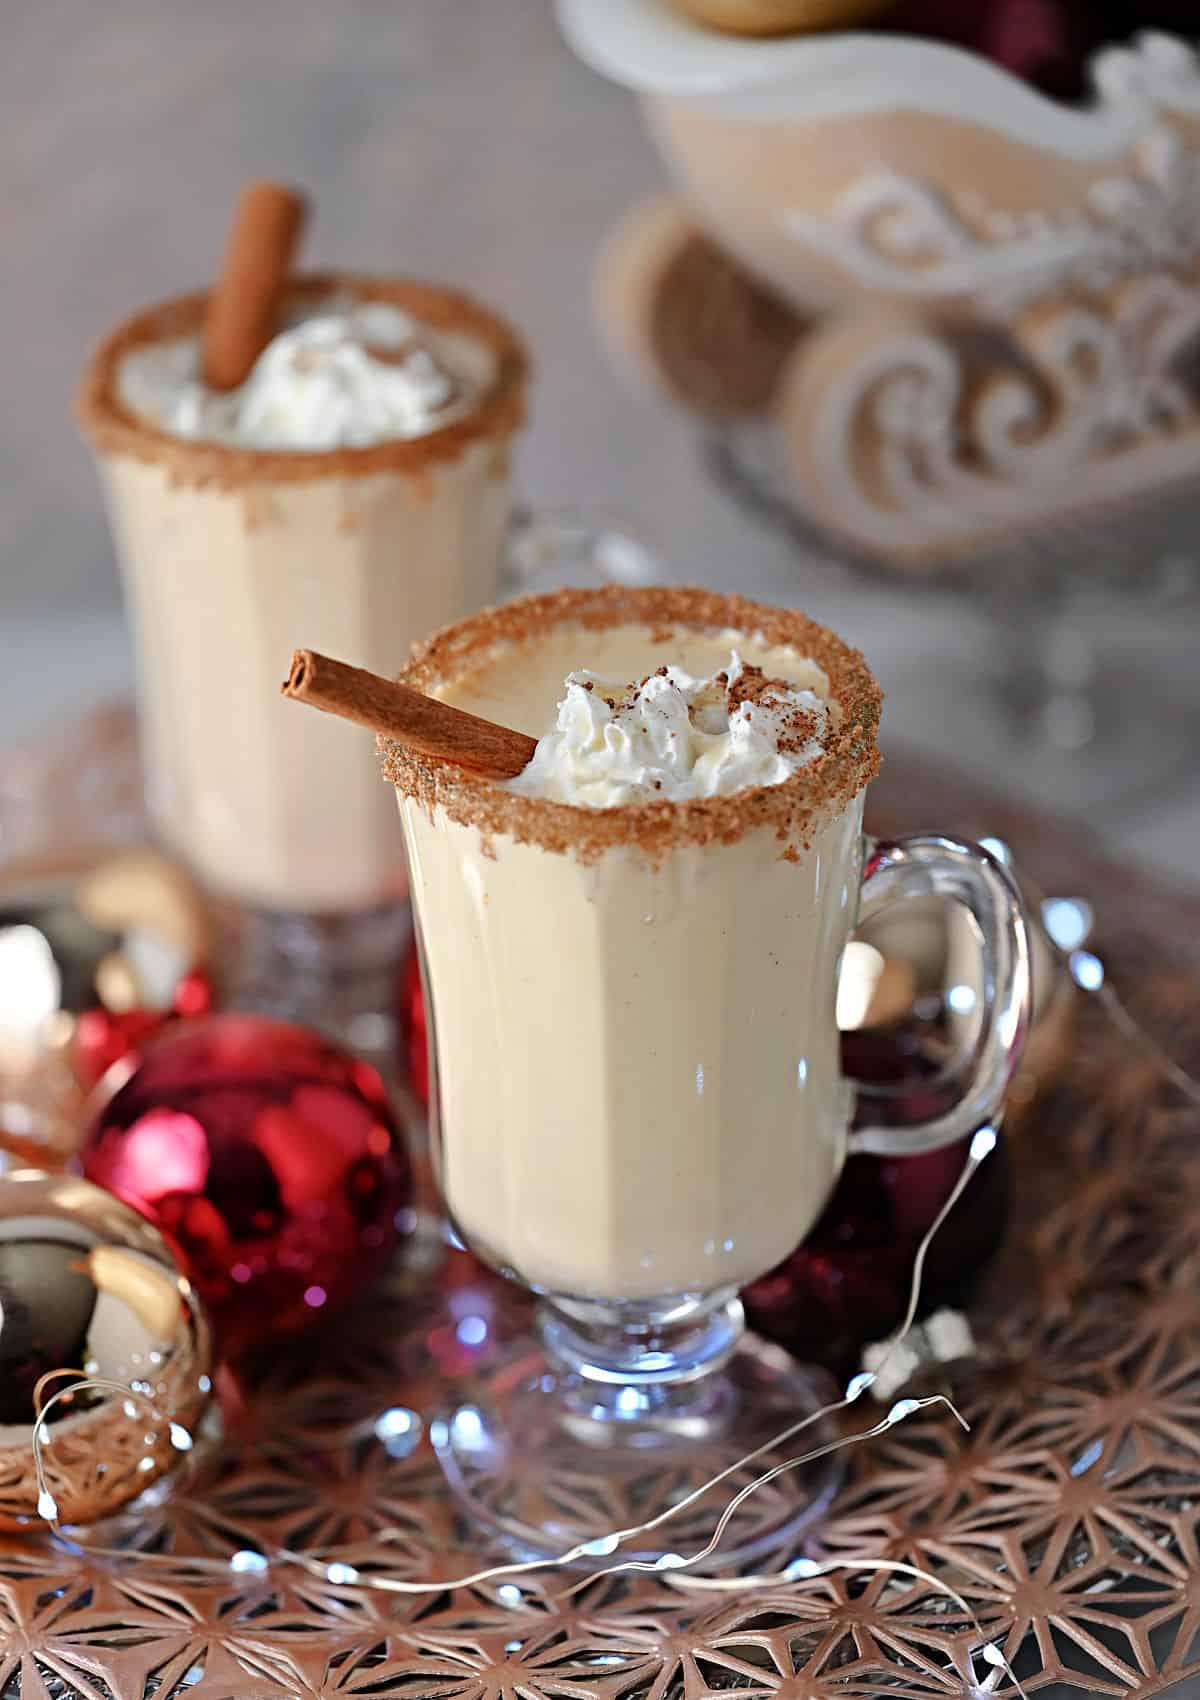 Eggnog Baileys cocktail garnished with whipped cream and nutmeg, plus a cinnamon stick.